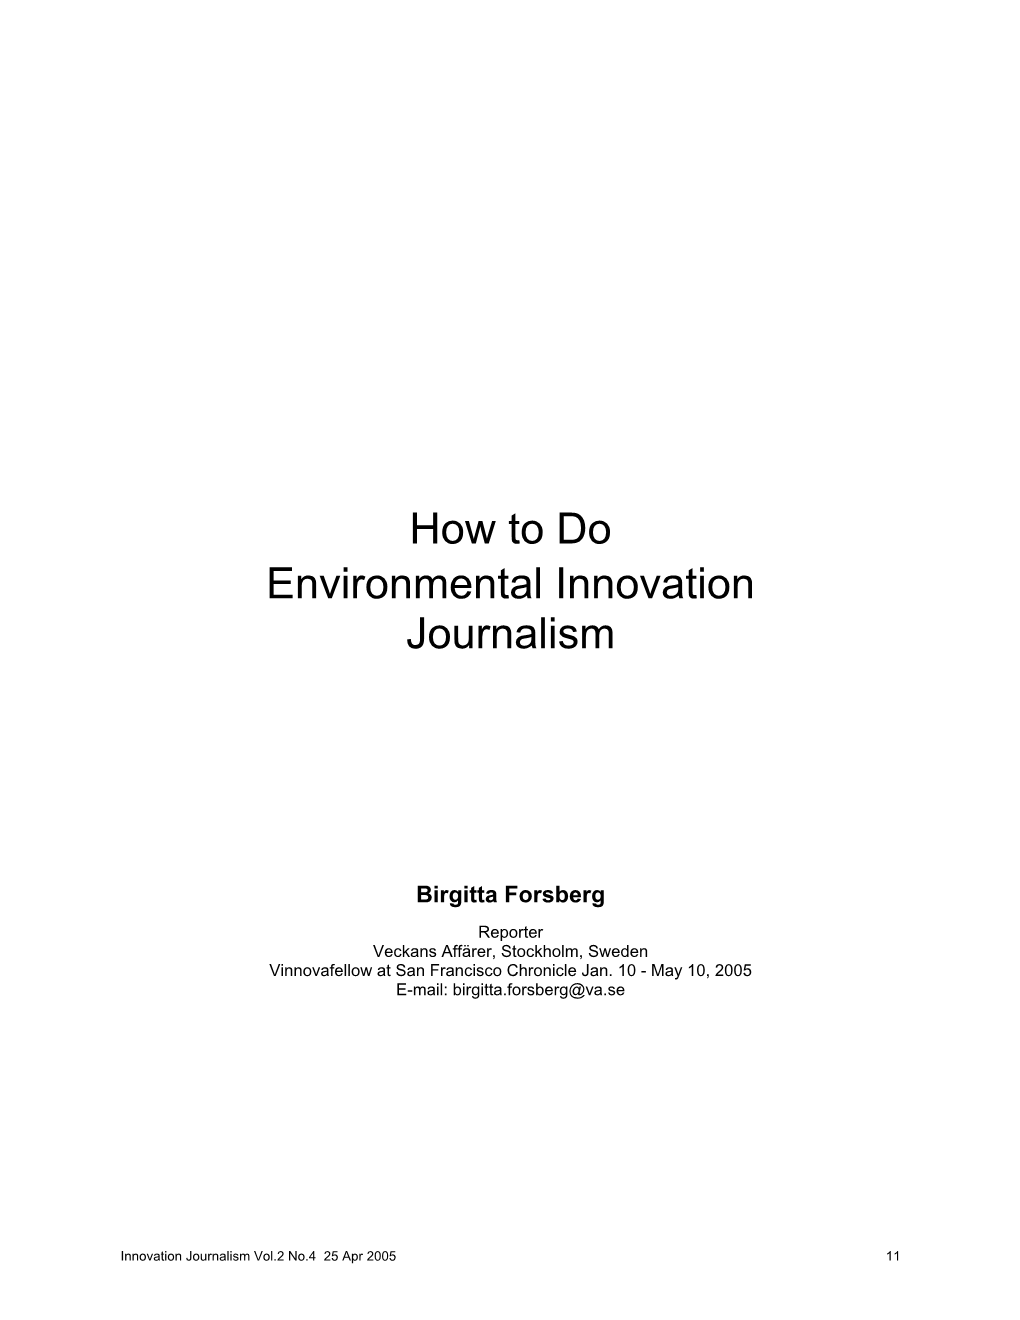 How to Do Environmental Journalism